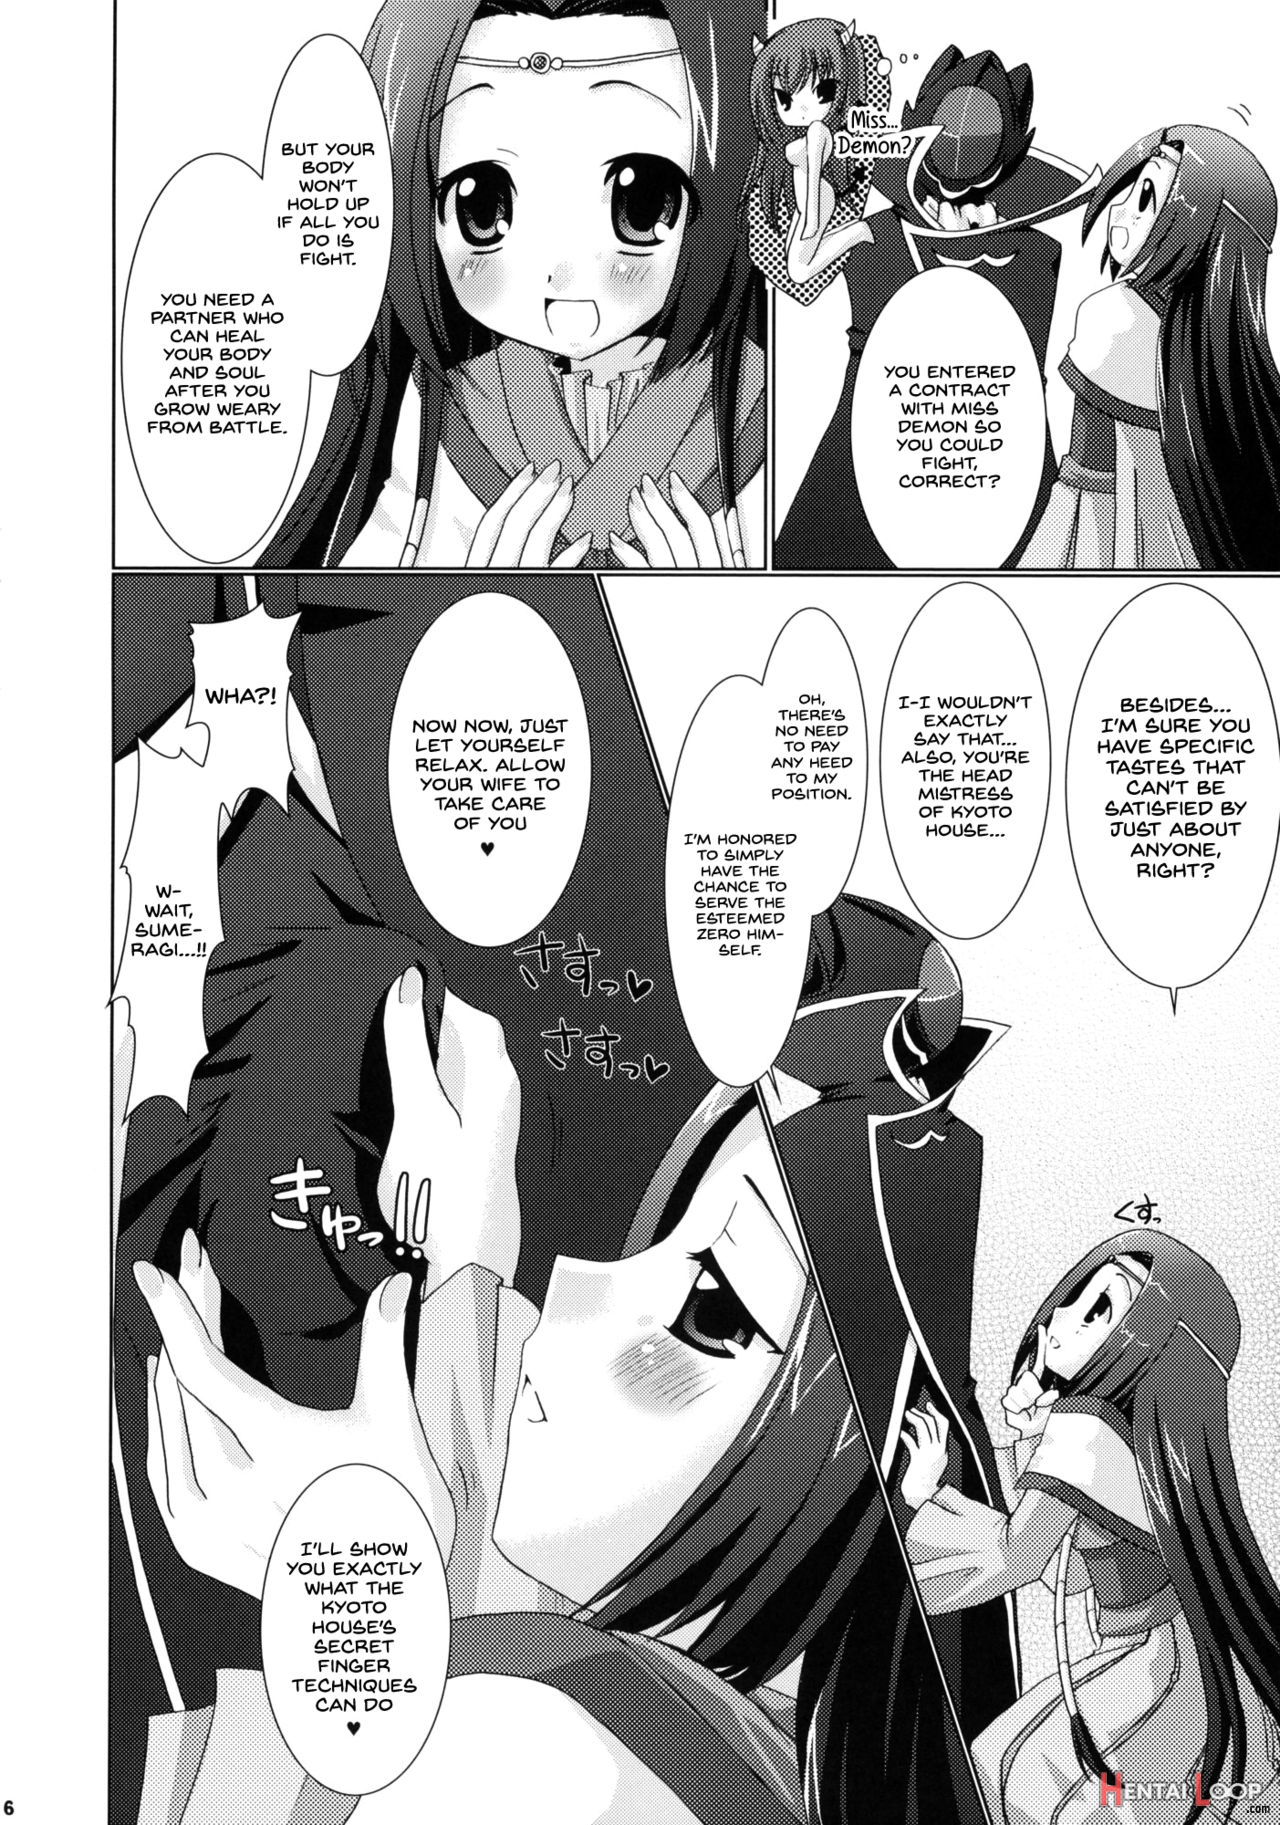 Kouhime Kyouhime page 6